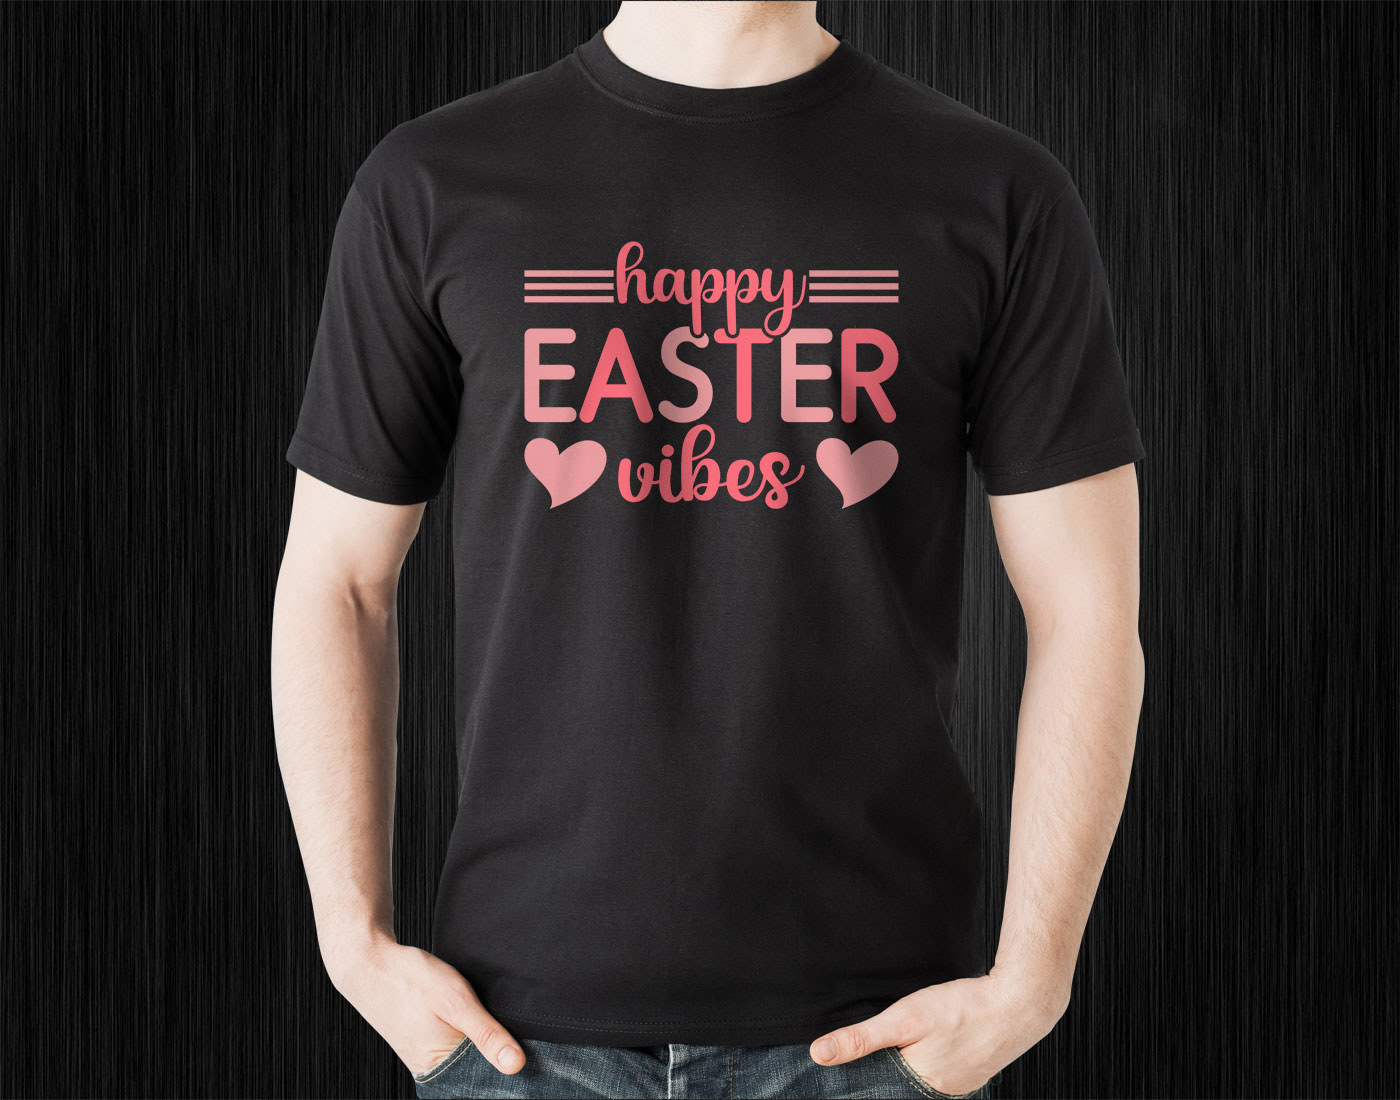 t-shirt Clothing fashion design ILLUSTRATION  Graphic Designer designs fathers day t-shirt easter sunday t-shirt happy easter vibes i am the creative bunny